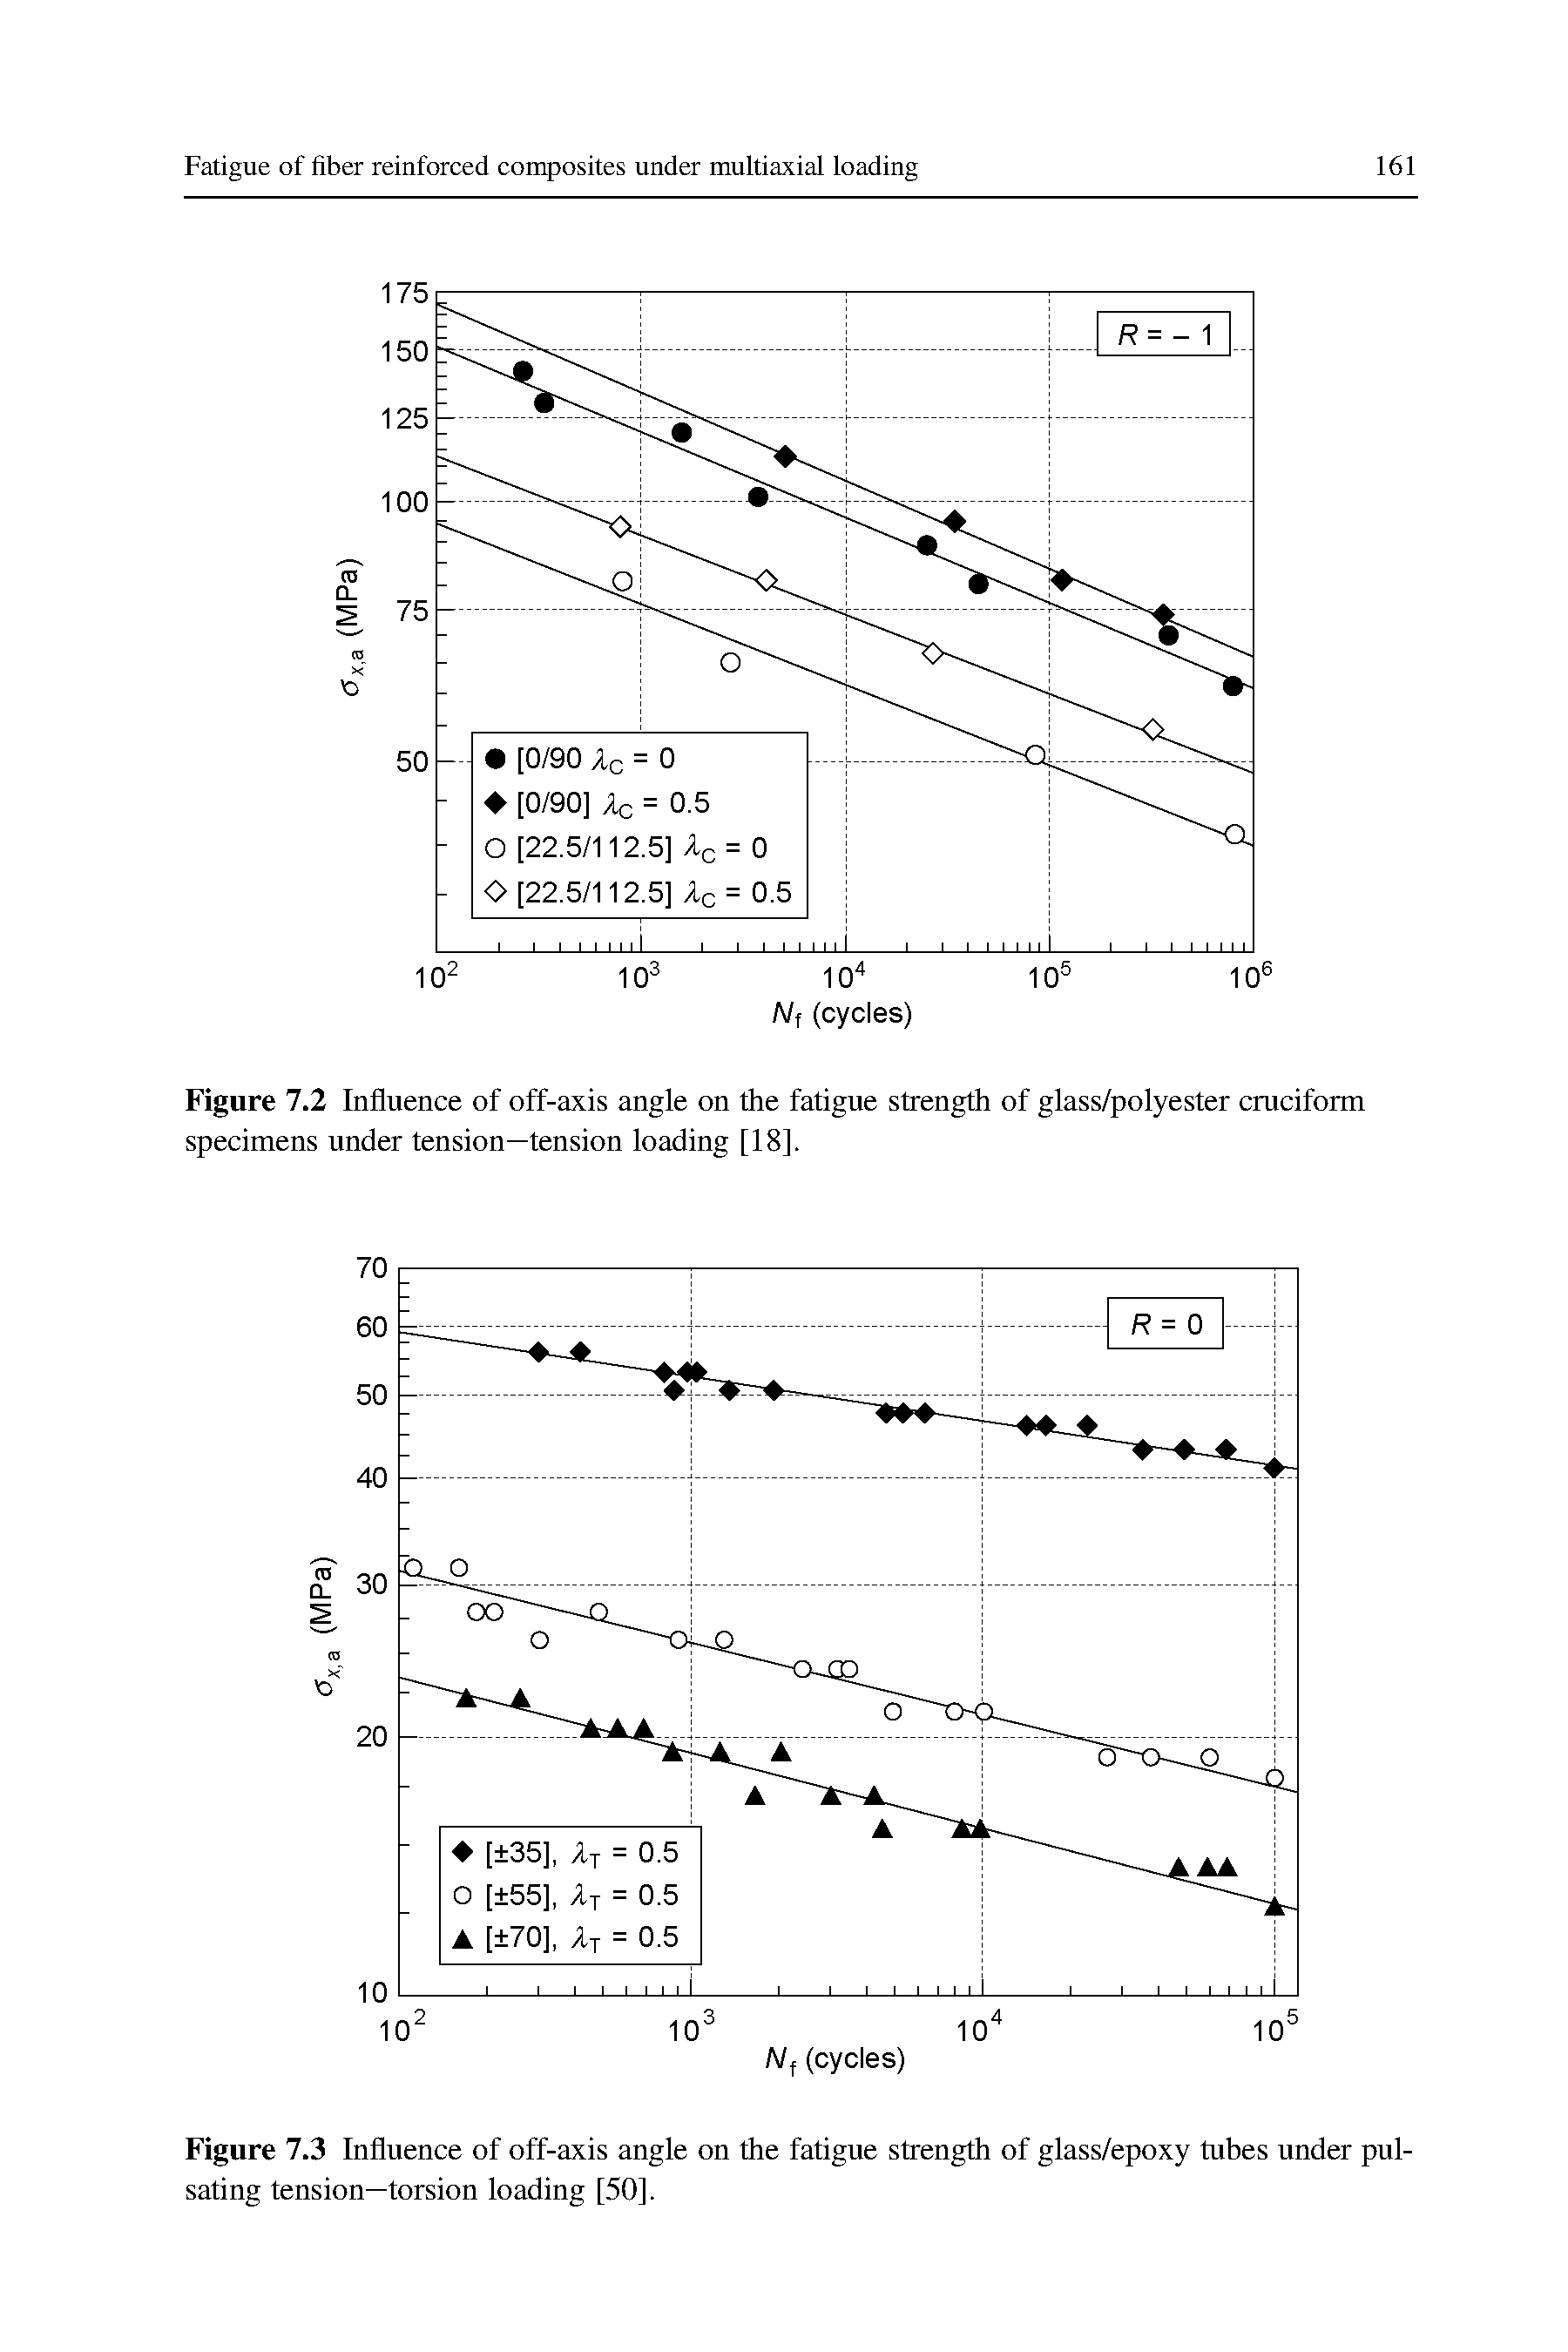 Figure 7.3 Influence of off-axis angle on the fatigue strength of glass/epoxy tubes under pulsating tension—torsion loading [50].